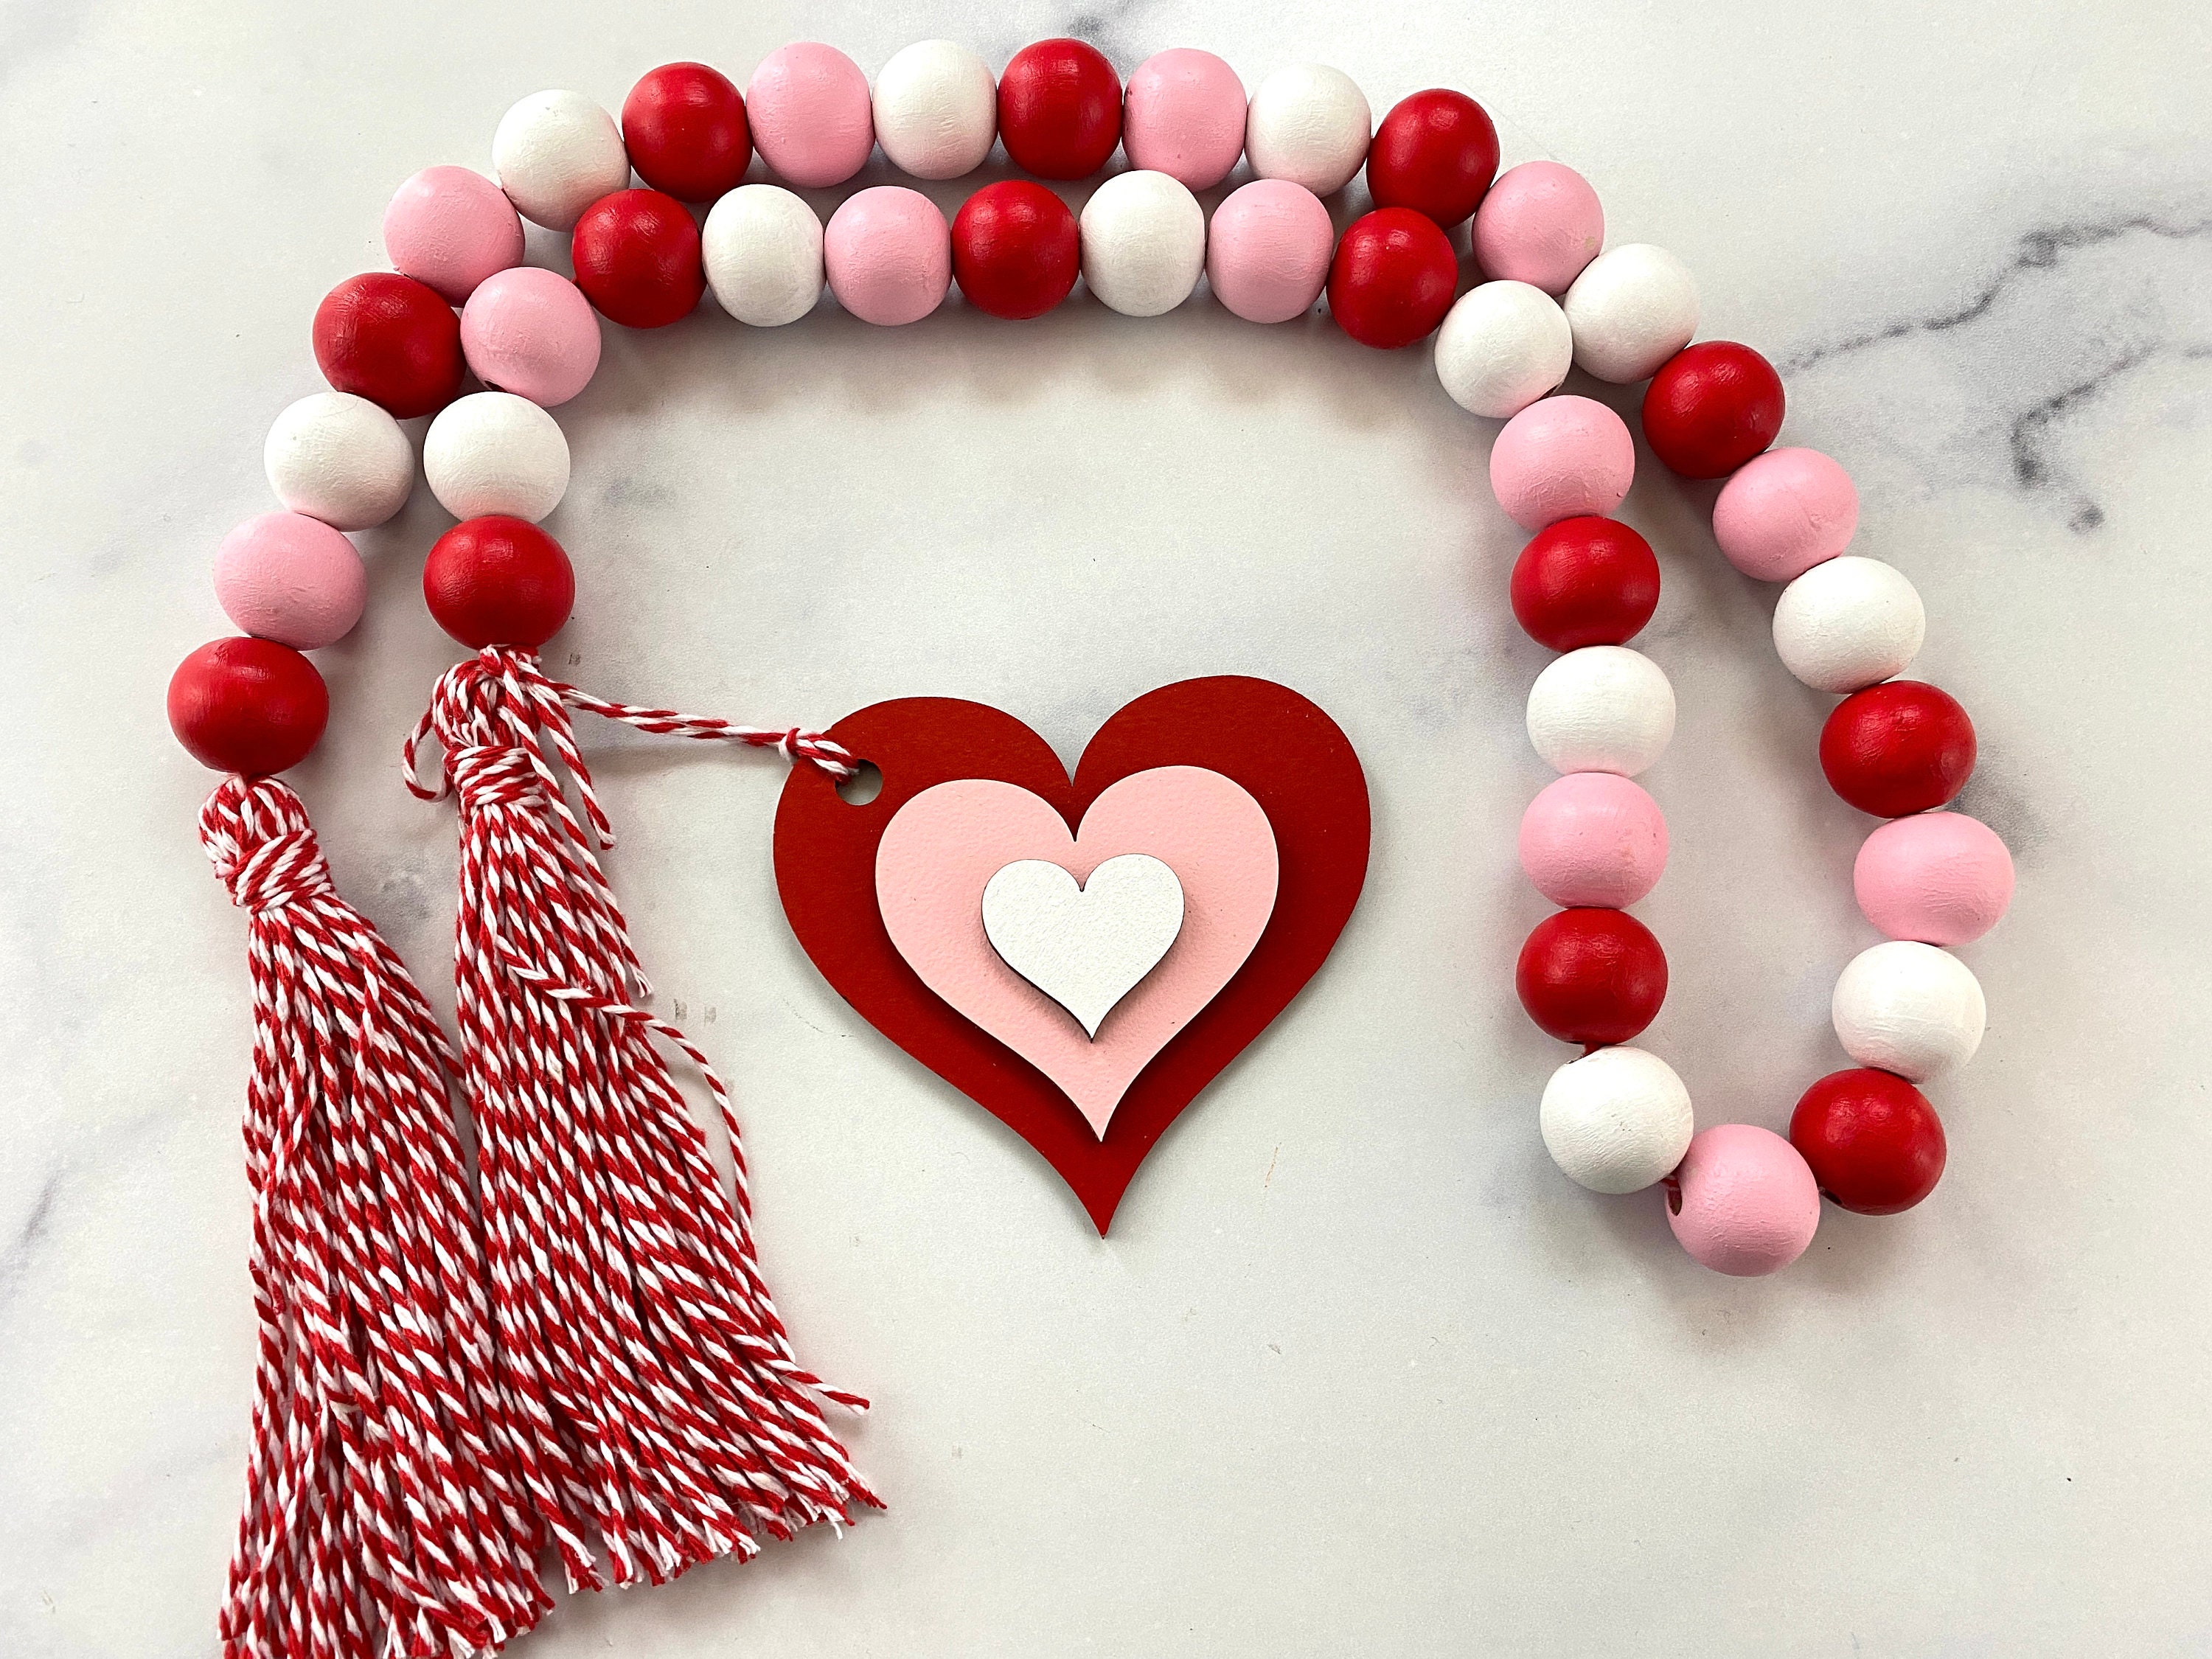 New 6' Long Wooden Beaded Garland Decor Valentines Red & Cream